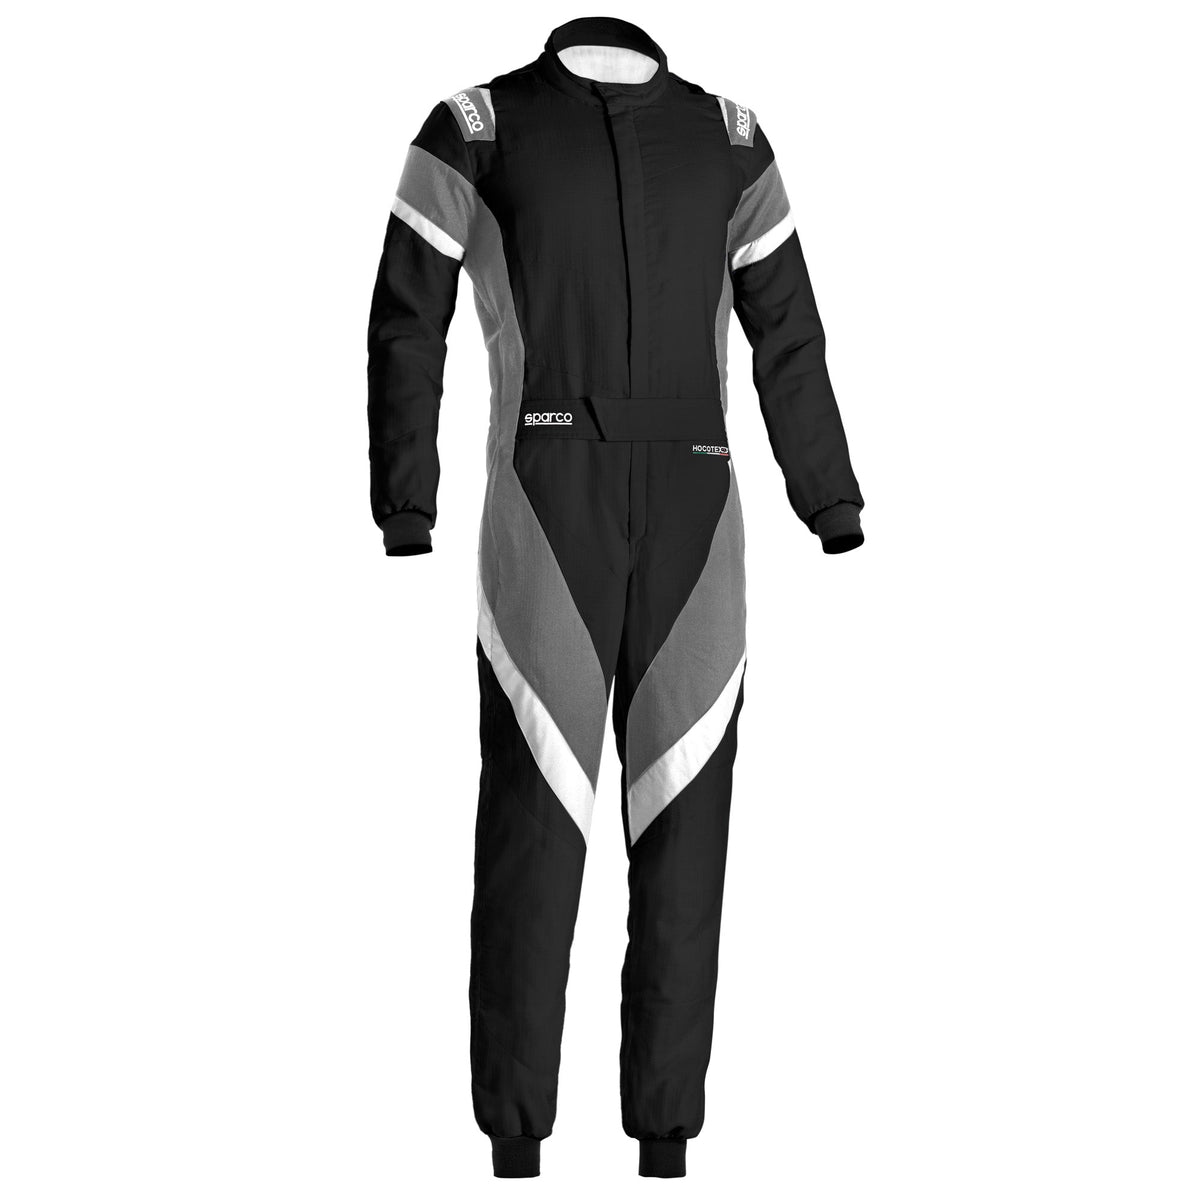 Sparco Victory 2.0 Racing Suit - Black/White